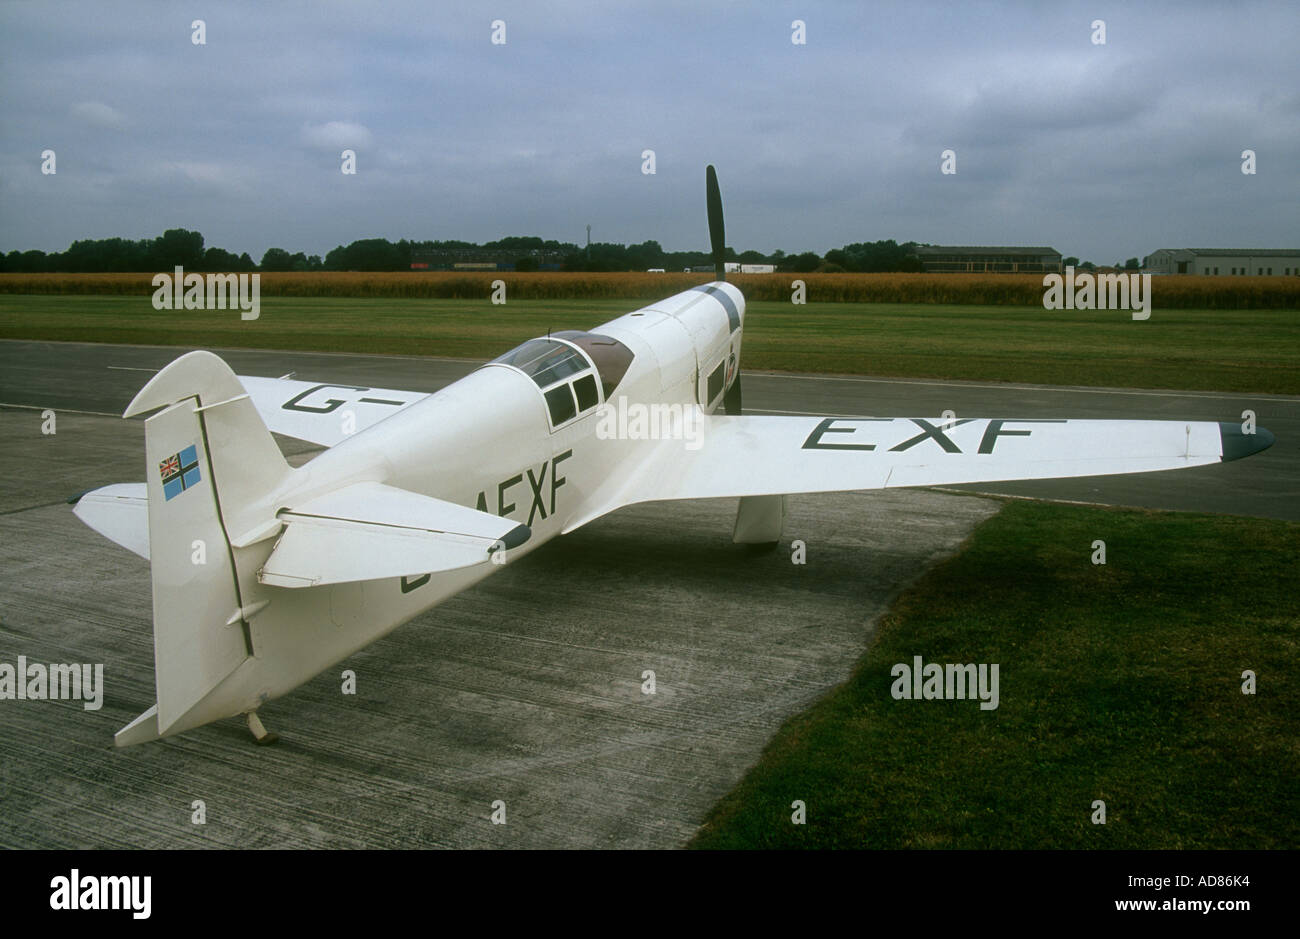 Percival Mew Gull G-AEXF air racing aircraft of the Real Aeroplane Company, on dispersal at Breighton airfield Stock Photo